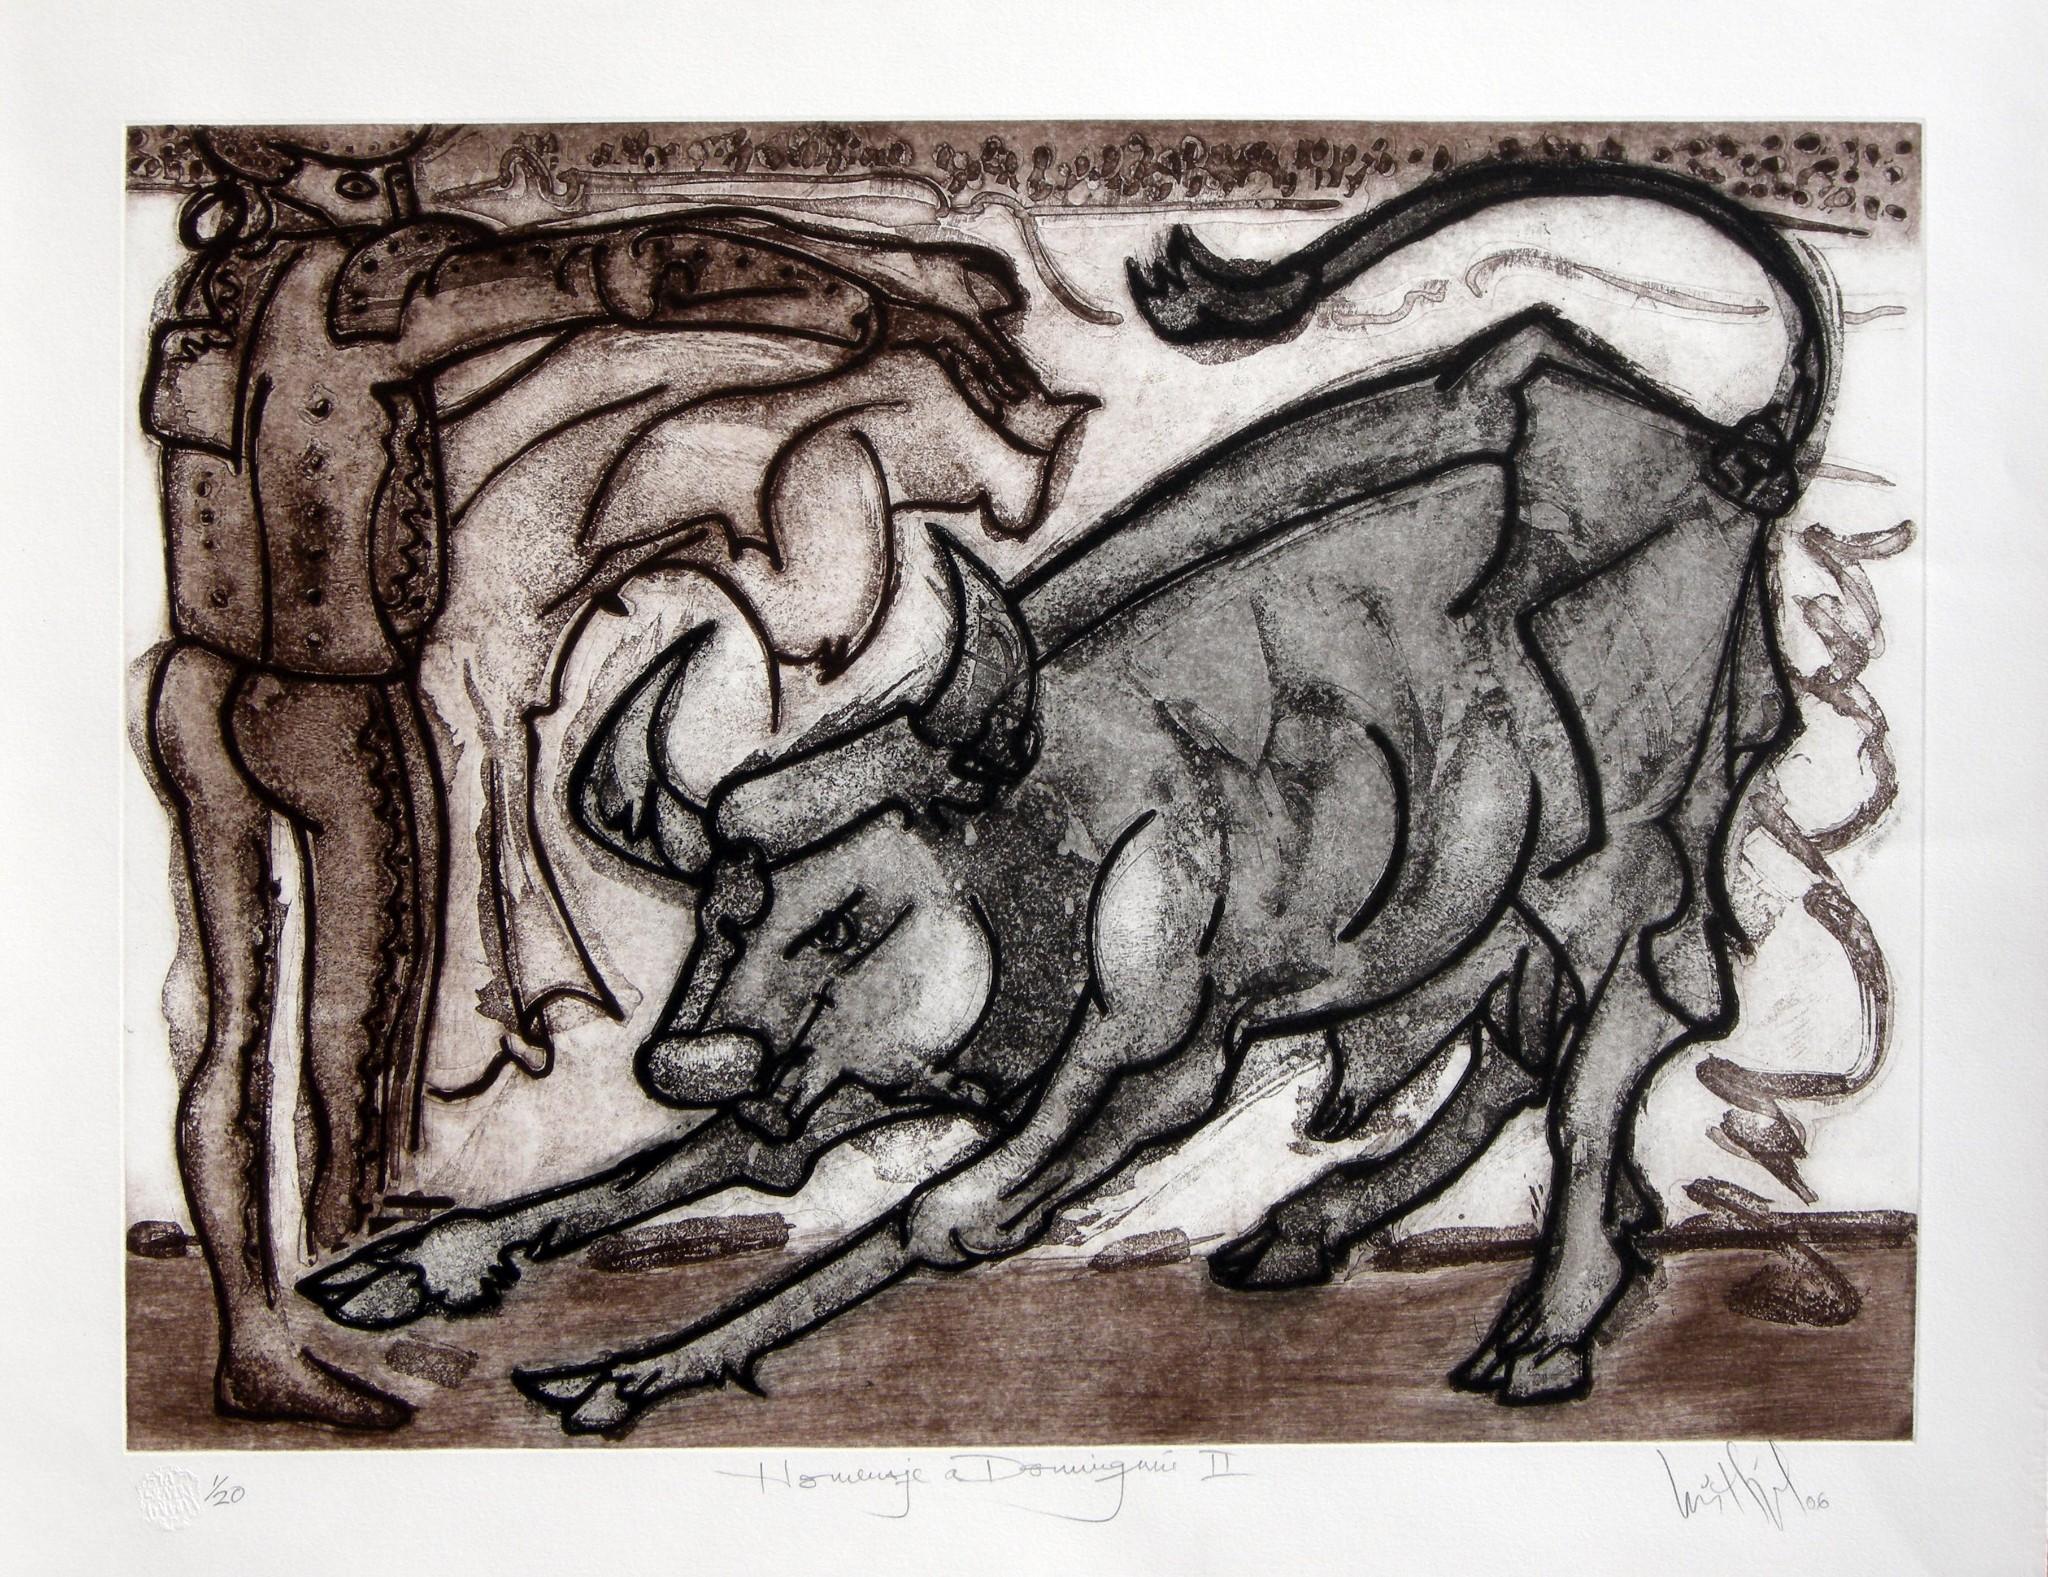 Cuban signed limited edition original art print etching, aquatint, sugarlift 130 - Print by Luis Miguel Valdes 